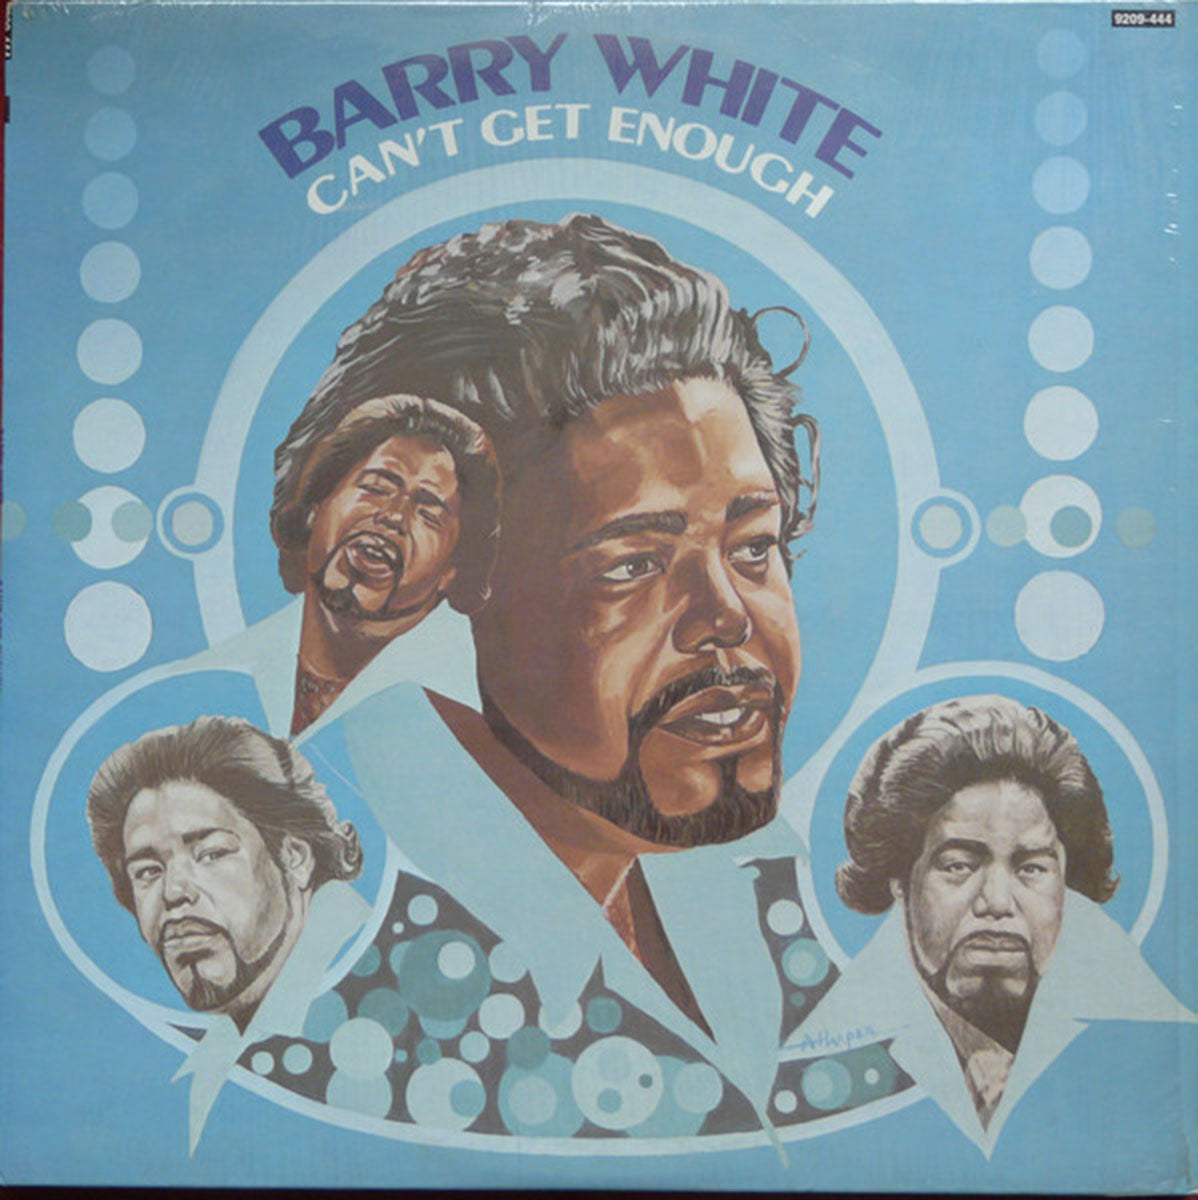 Barry White - Can't get Enough - 1974